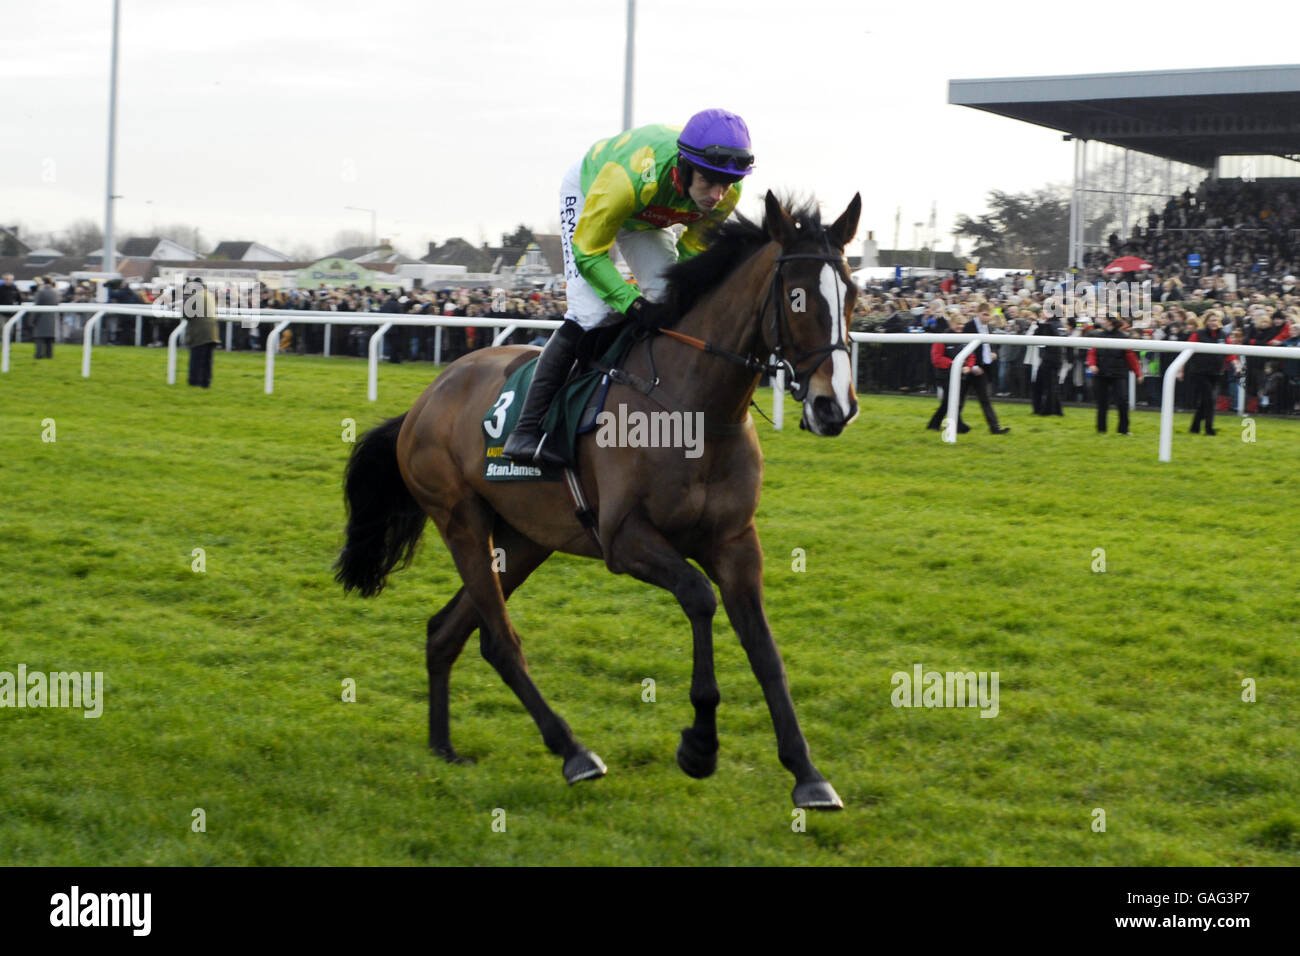 Horse Racing - Kempton Park Racecourse. Kauto Star ridden by Ruby Walsh in the Stan James King George VI Chase (Grade 1) Stock Photo